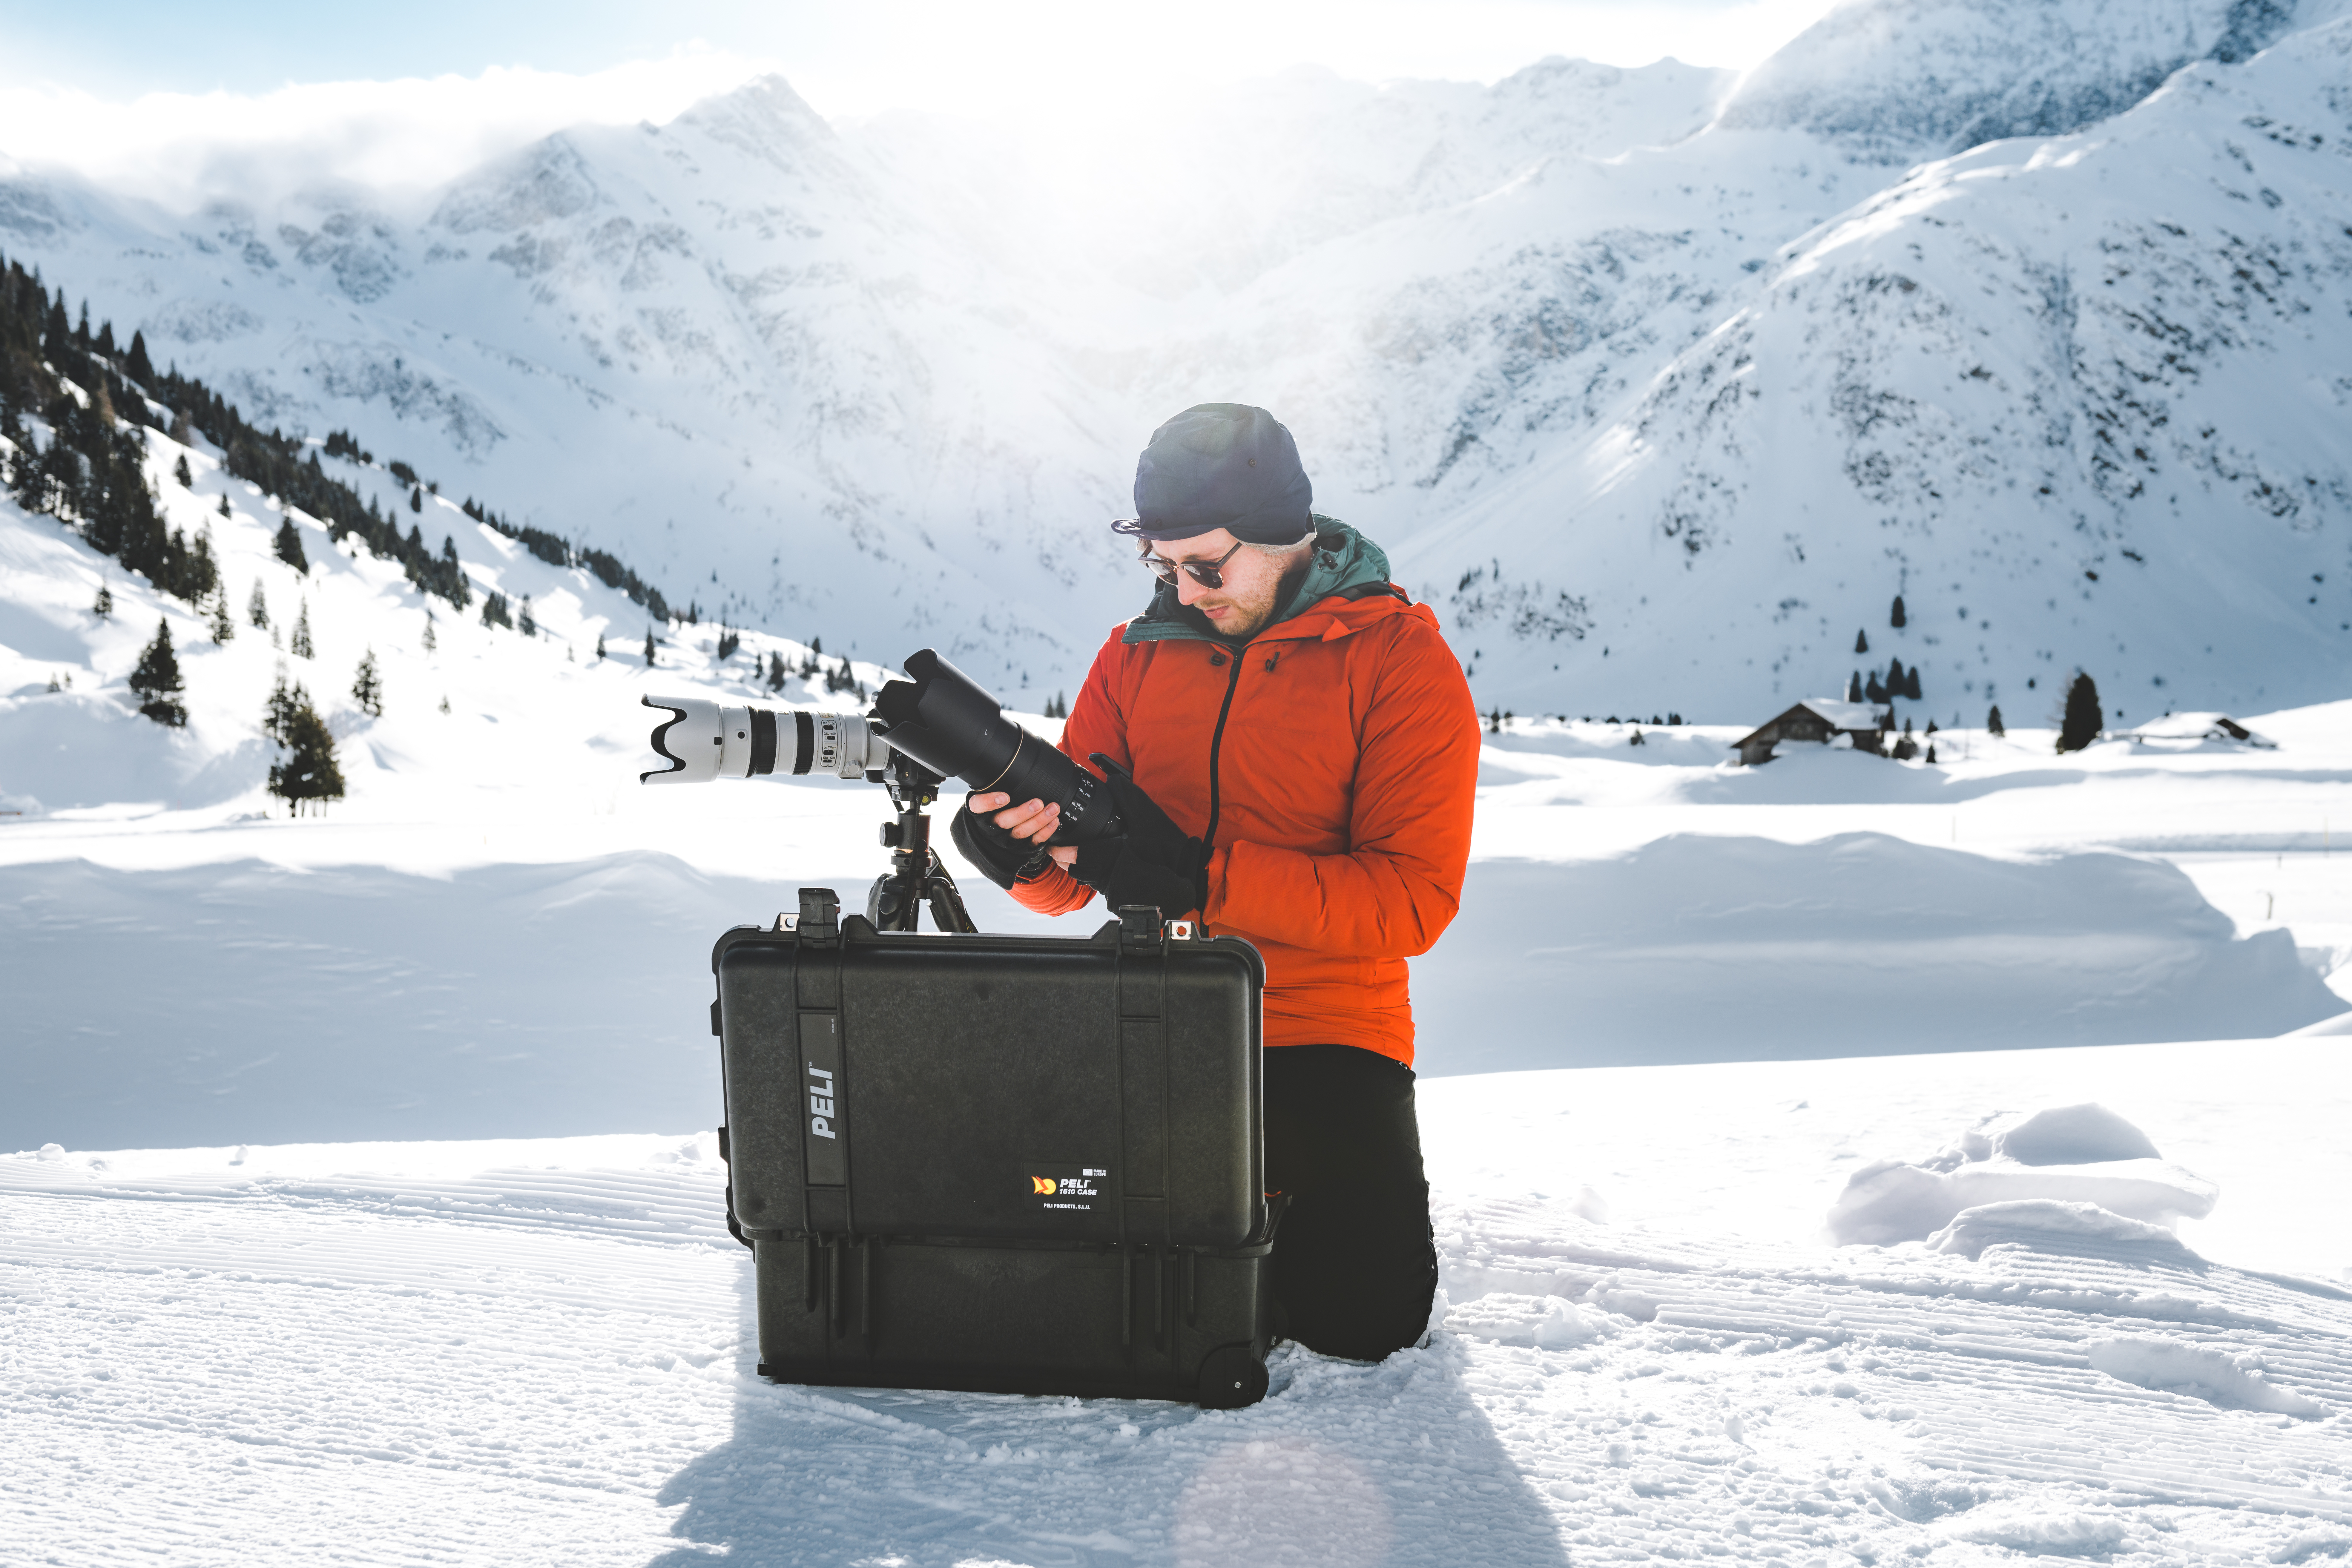 Enhancing Winter Sports Adventures with Peli Cases and Lights